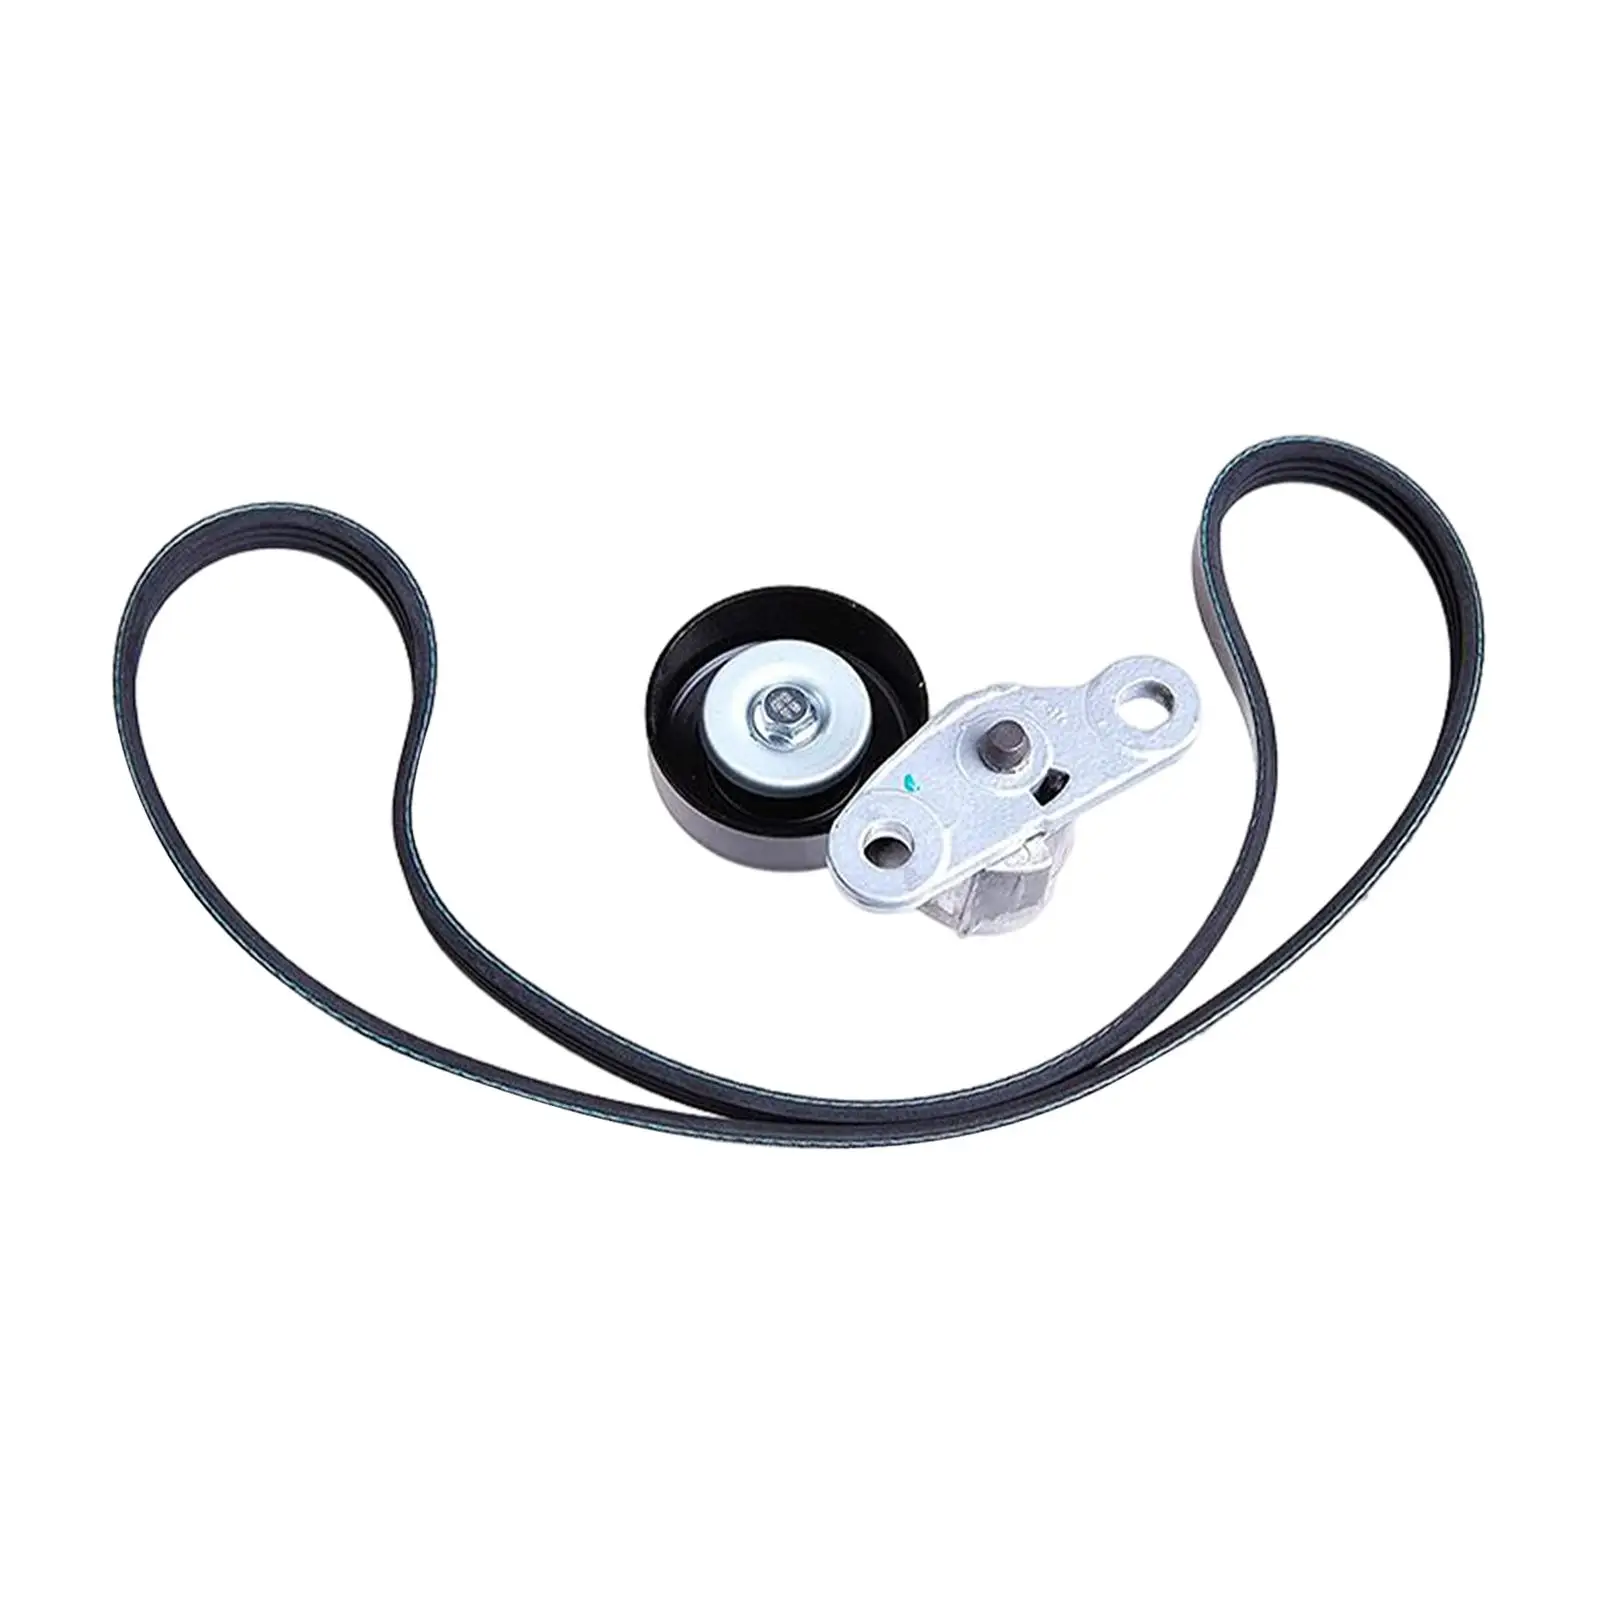 Complete Serpentine Belt Drive Component Kit for Chevrolet Avalanche